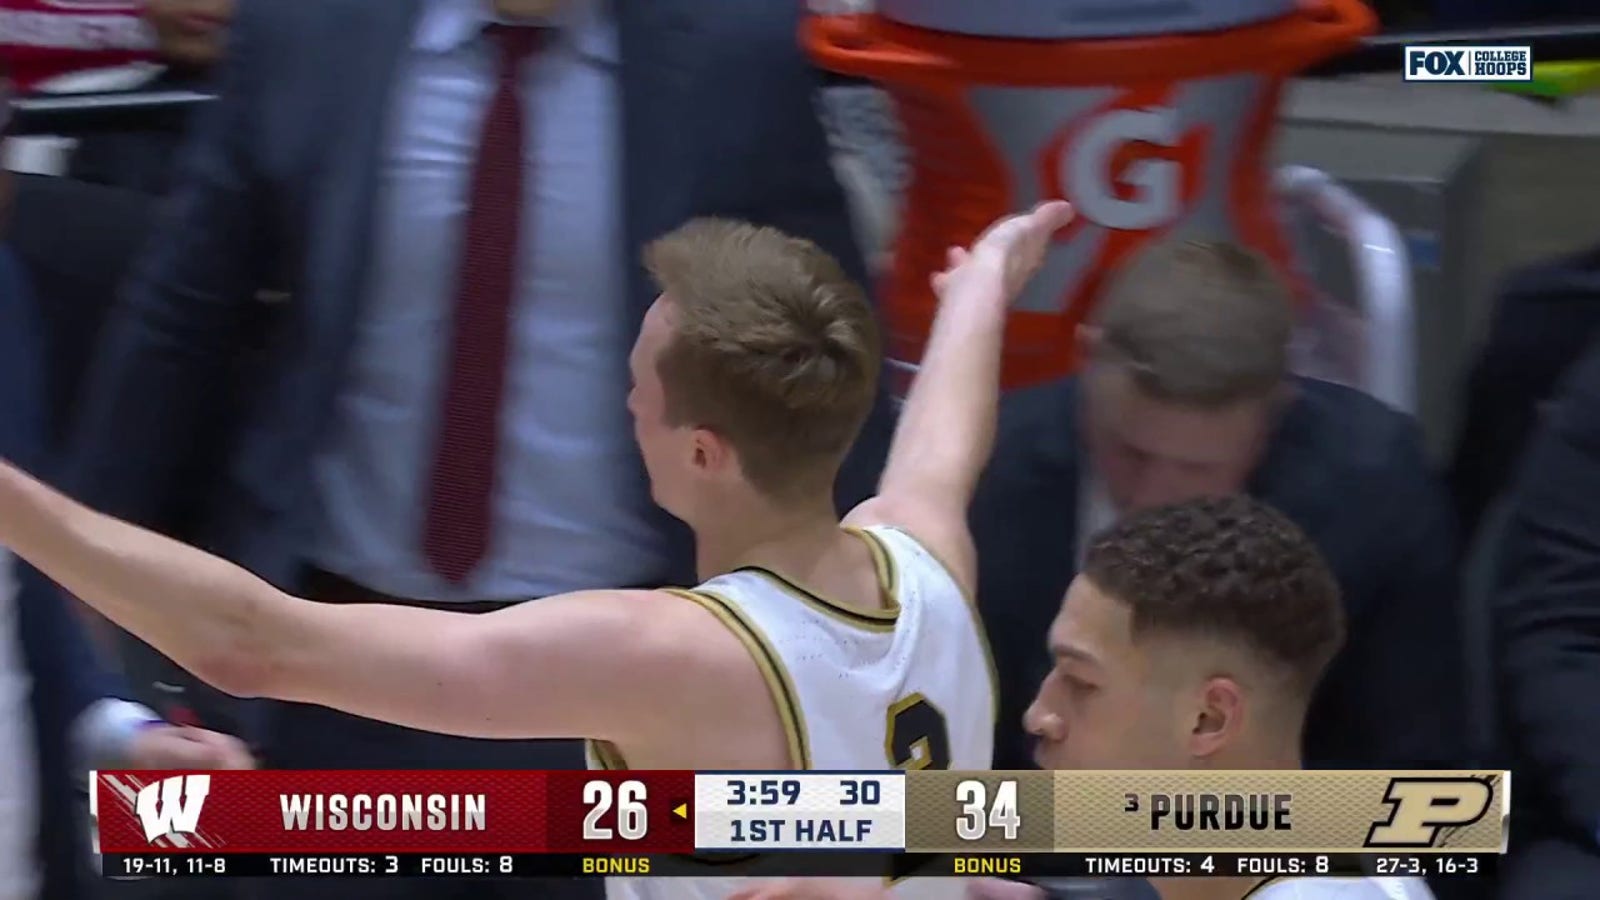 Fletcher Loyer hits a 3-pointer, plus a foul to extend Purdue's lead vs. Wisconsin.